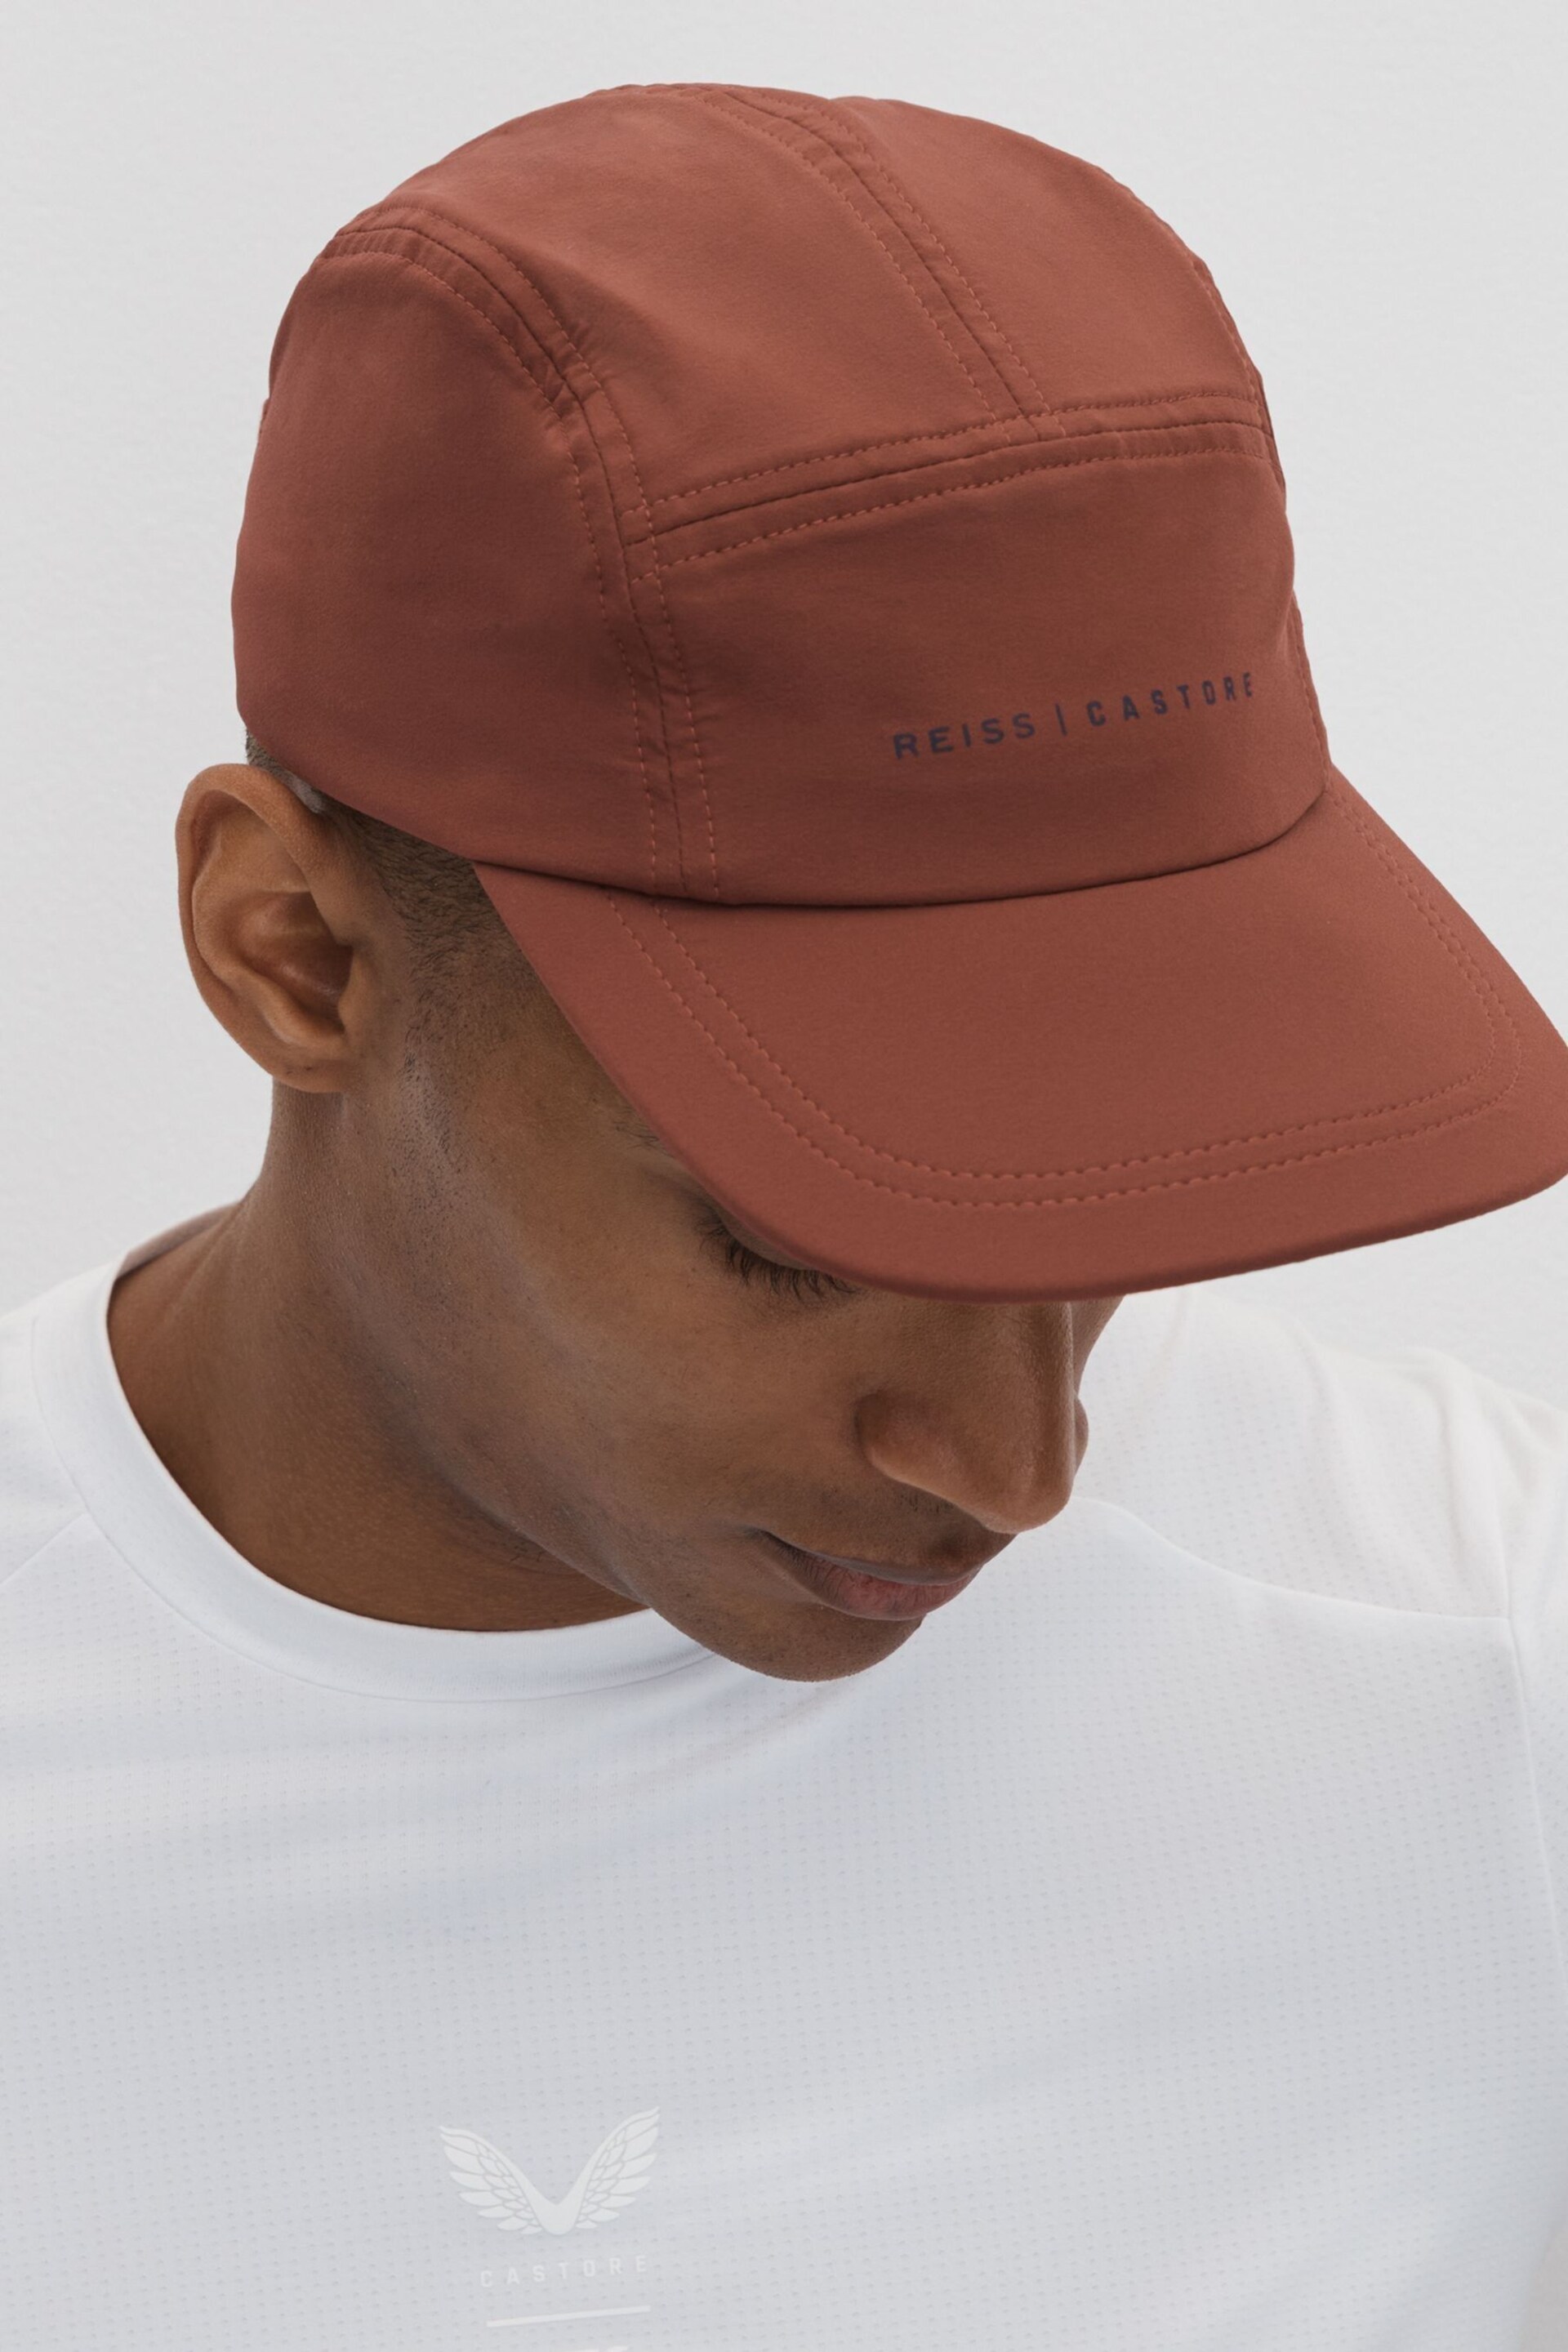 Reiss Rust Remy Castore Water Repellent Baseball Cap - Image 2 of 4